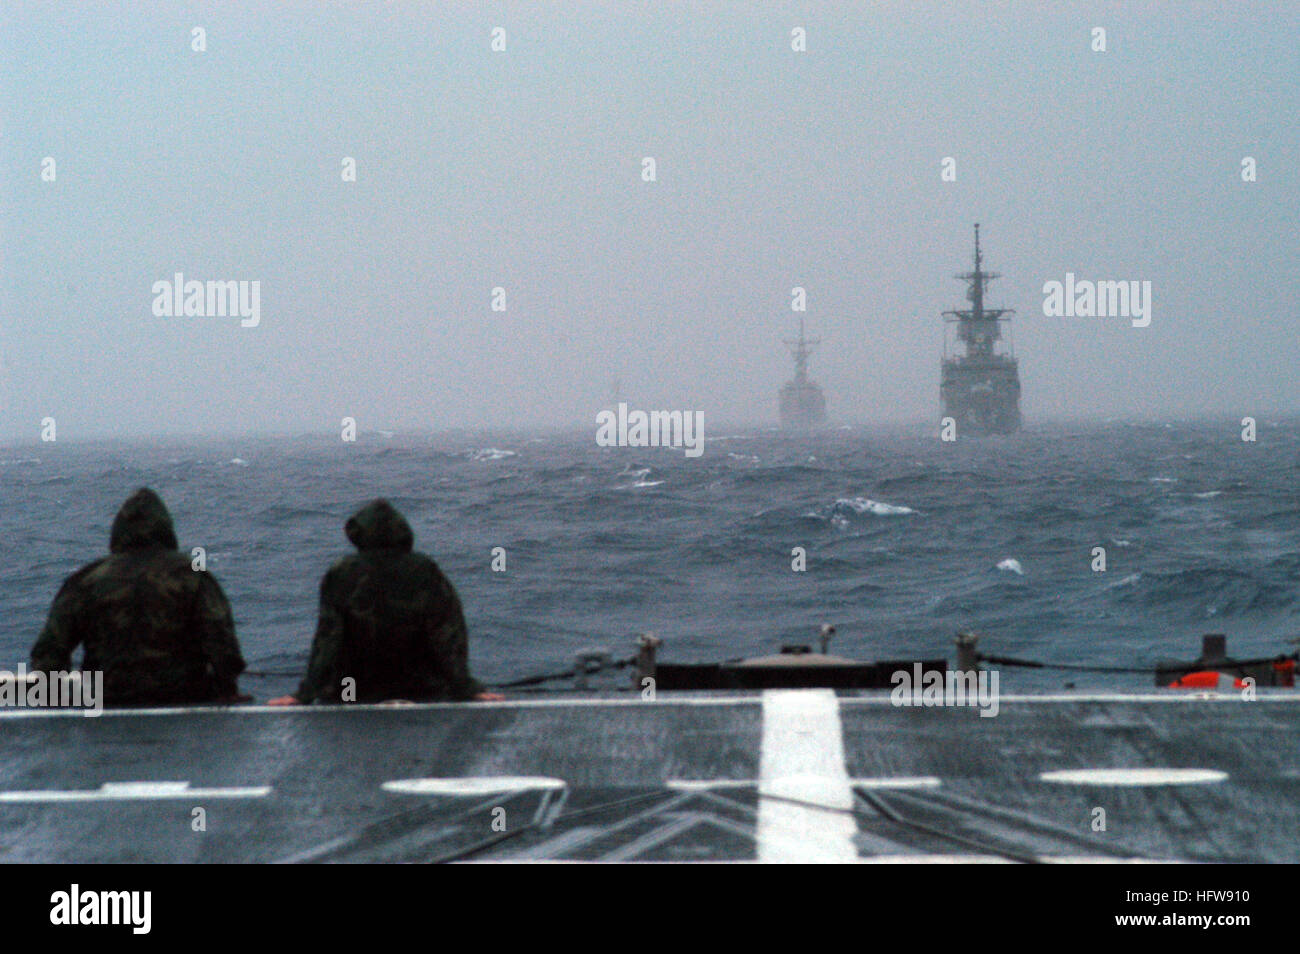 080613-N-3581D-006 GULF OF THAILAND (June 13, 2008) Two Sailors watch the Royal Thai Navy frigate HTMS Phutta Loetla Naphalai (FF 462) and the frigate USS Ford (FFG 54) encounter rough seas, low visibility, high winds, and rain squalls from the fantail of the frigate USS Jarrett (FFG 33). Jarrrett is one of several U.S. and Thai ships taking part in Cooperation Afloat Readiness and Training (CARAT) 2008. U.S. Navy photo by Mass Communication Specialist 1st Class Maurice Dayao (Released) US Navy 080613-N-3581D-006 Two Sailors watch the Royal Thai Navy frigate HTMS Phutta Loetla Naphalai (FF 462 Stock Photo